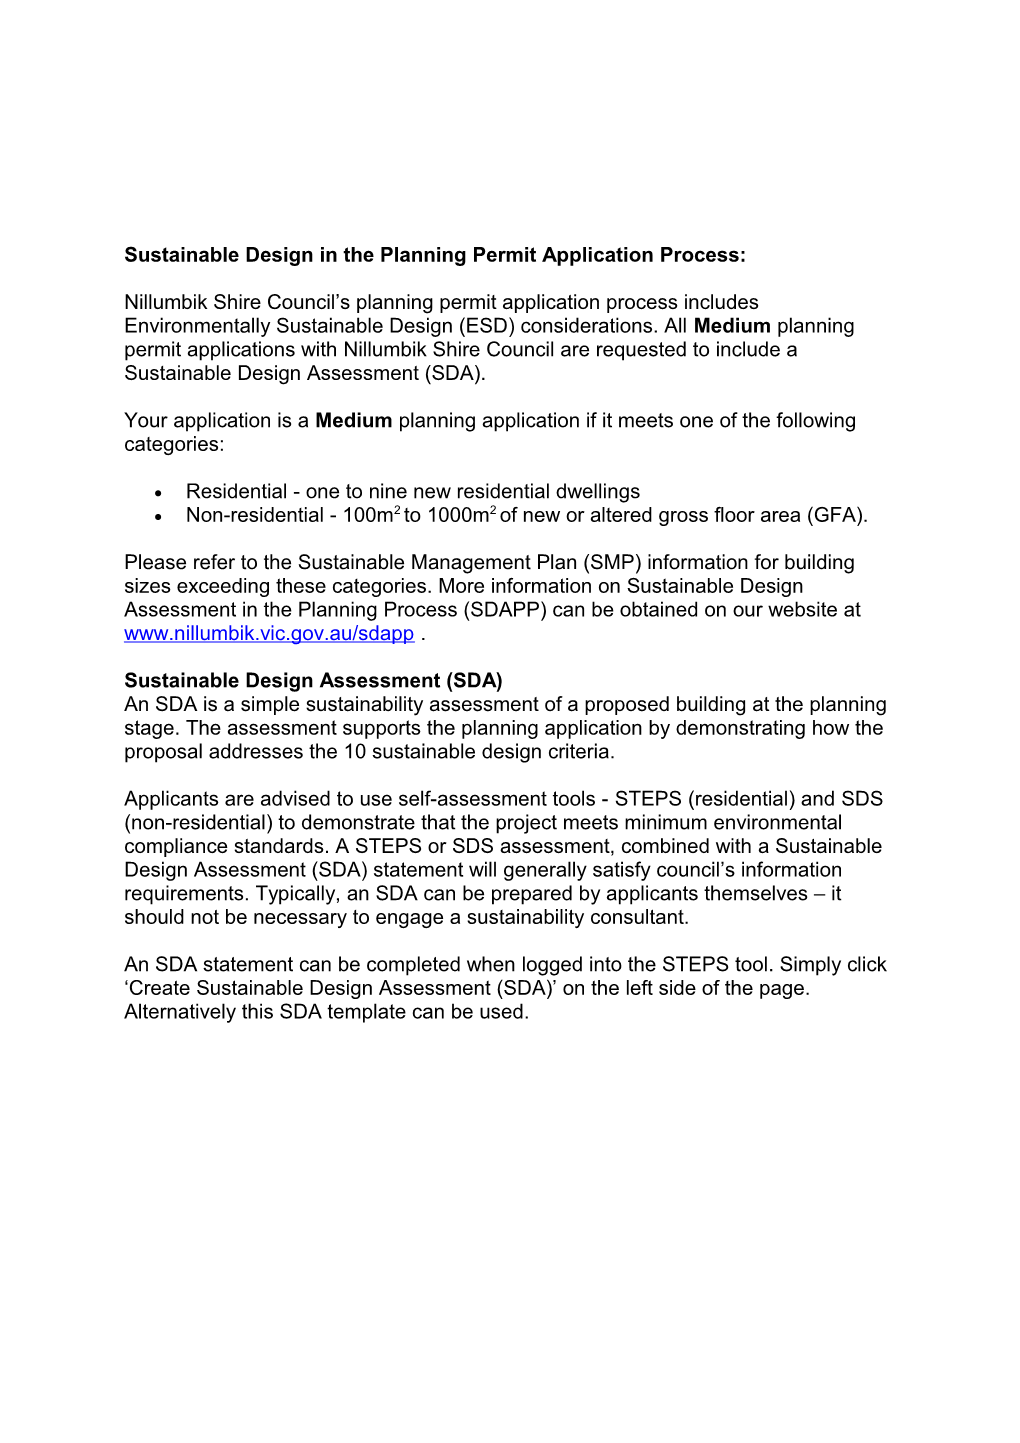 Sustainable Design in the Planning Permit Application Process